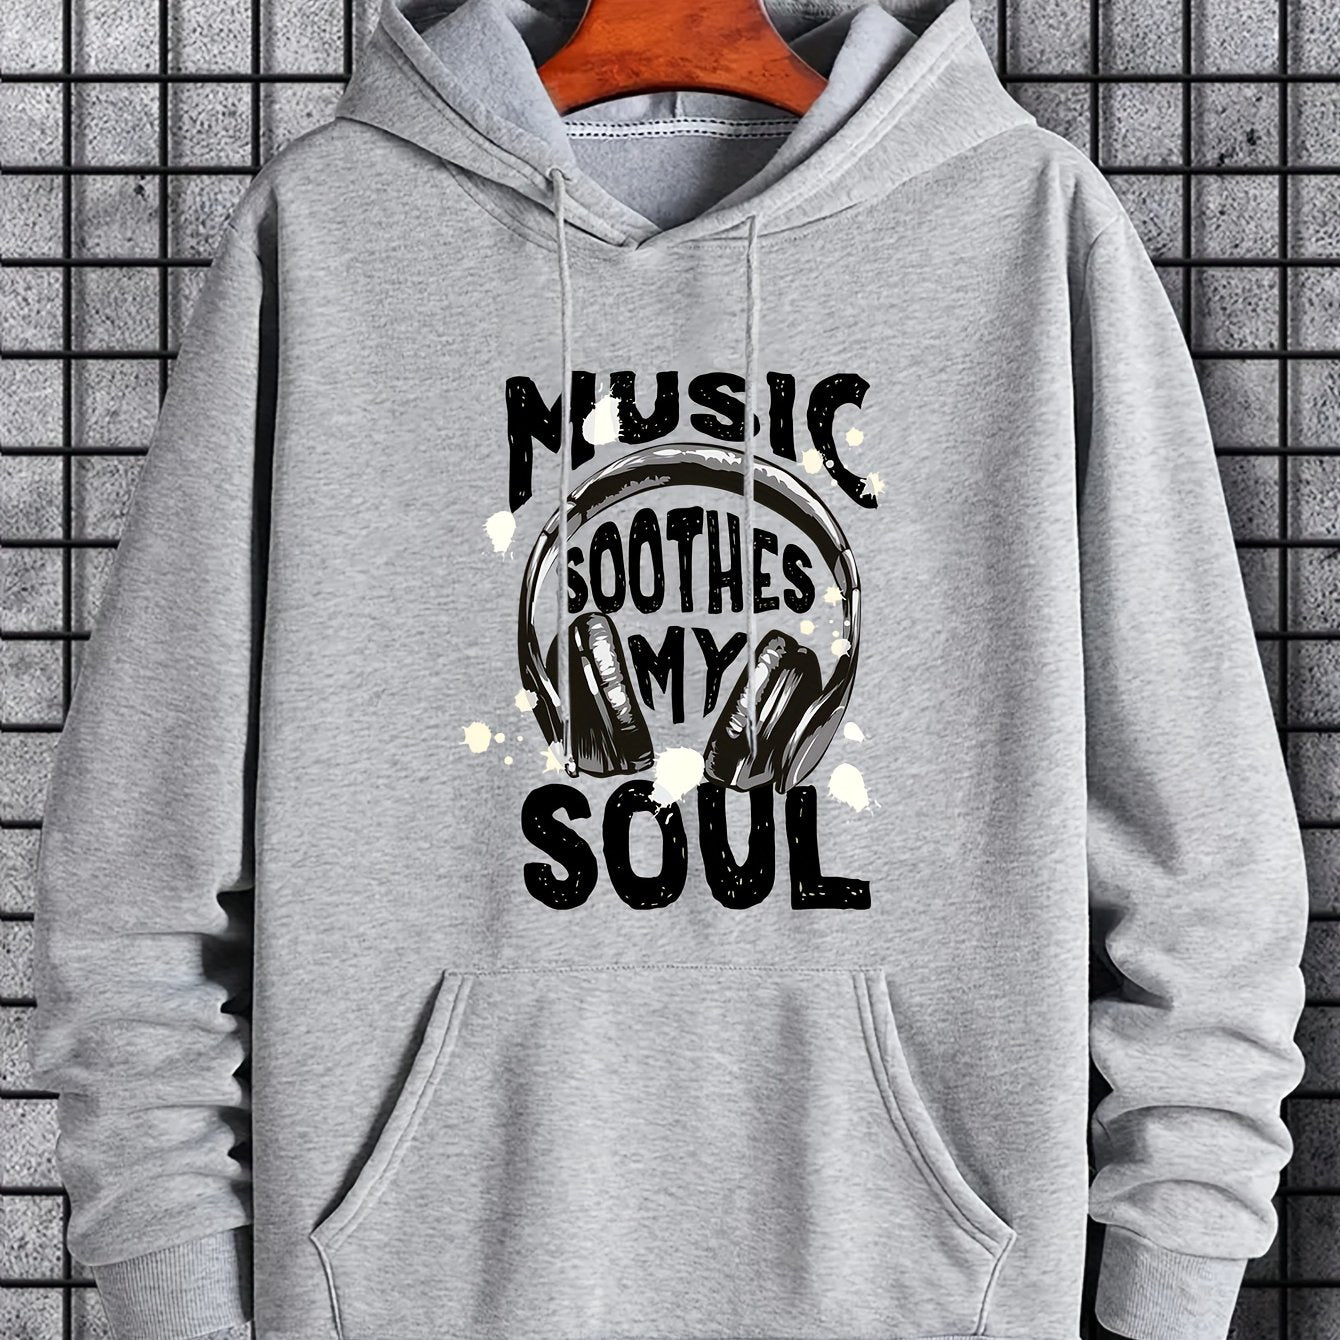 Music Lover Slogan Print, Hoodies For Men, Graphic Sweatshirt With Kangaroo Pocket, Comfy Trendy Hooded Pullover, Mens Clothing For Fall Winter